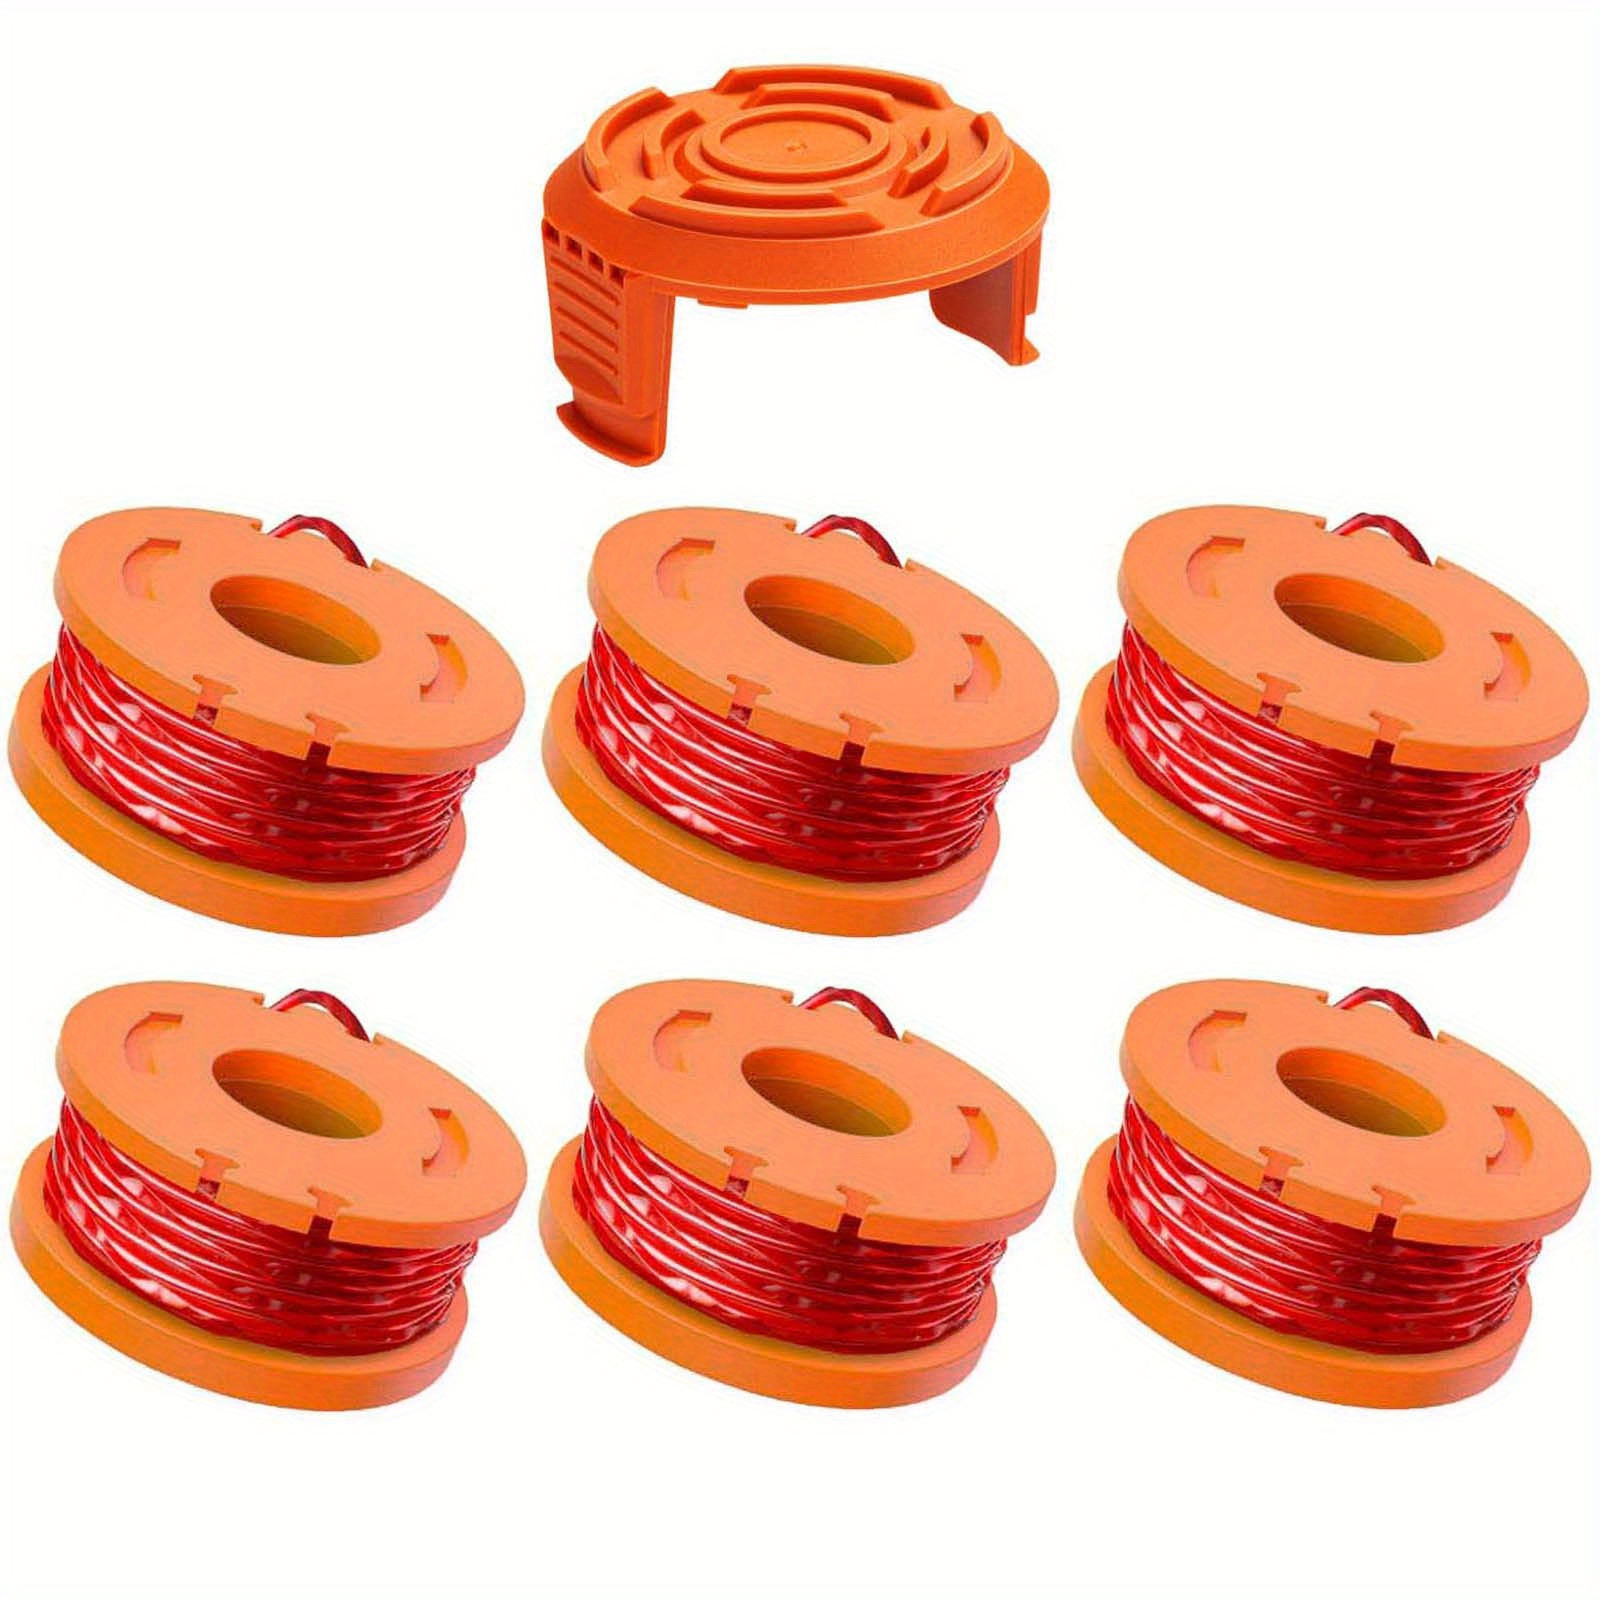 String Trimmer Replacement Spool Compatible With - Temu